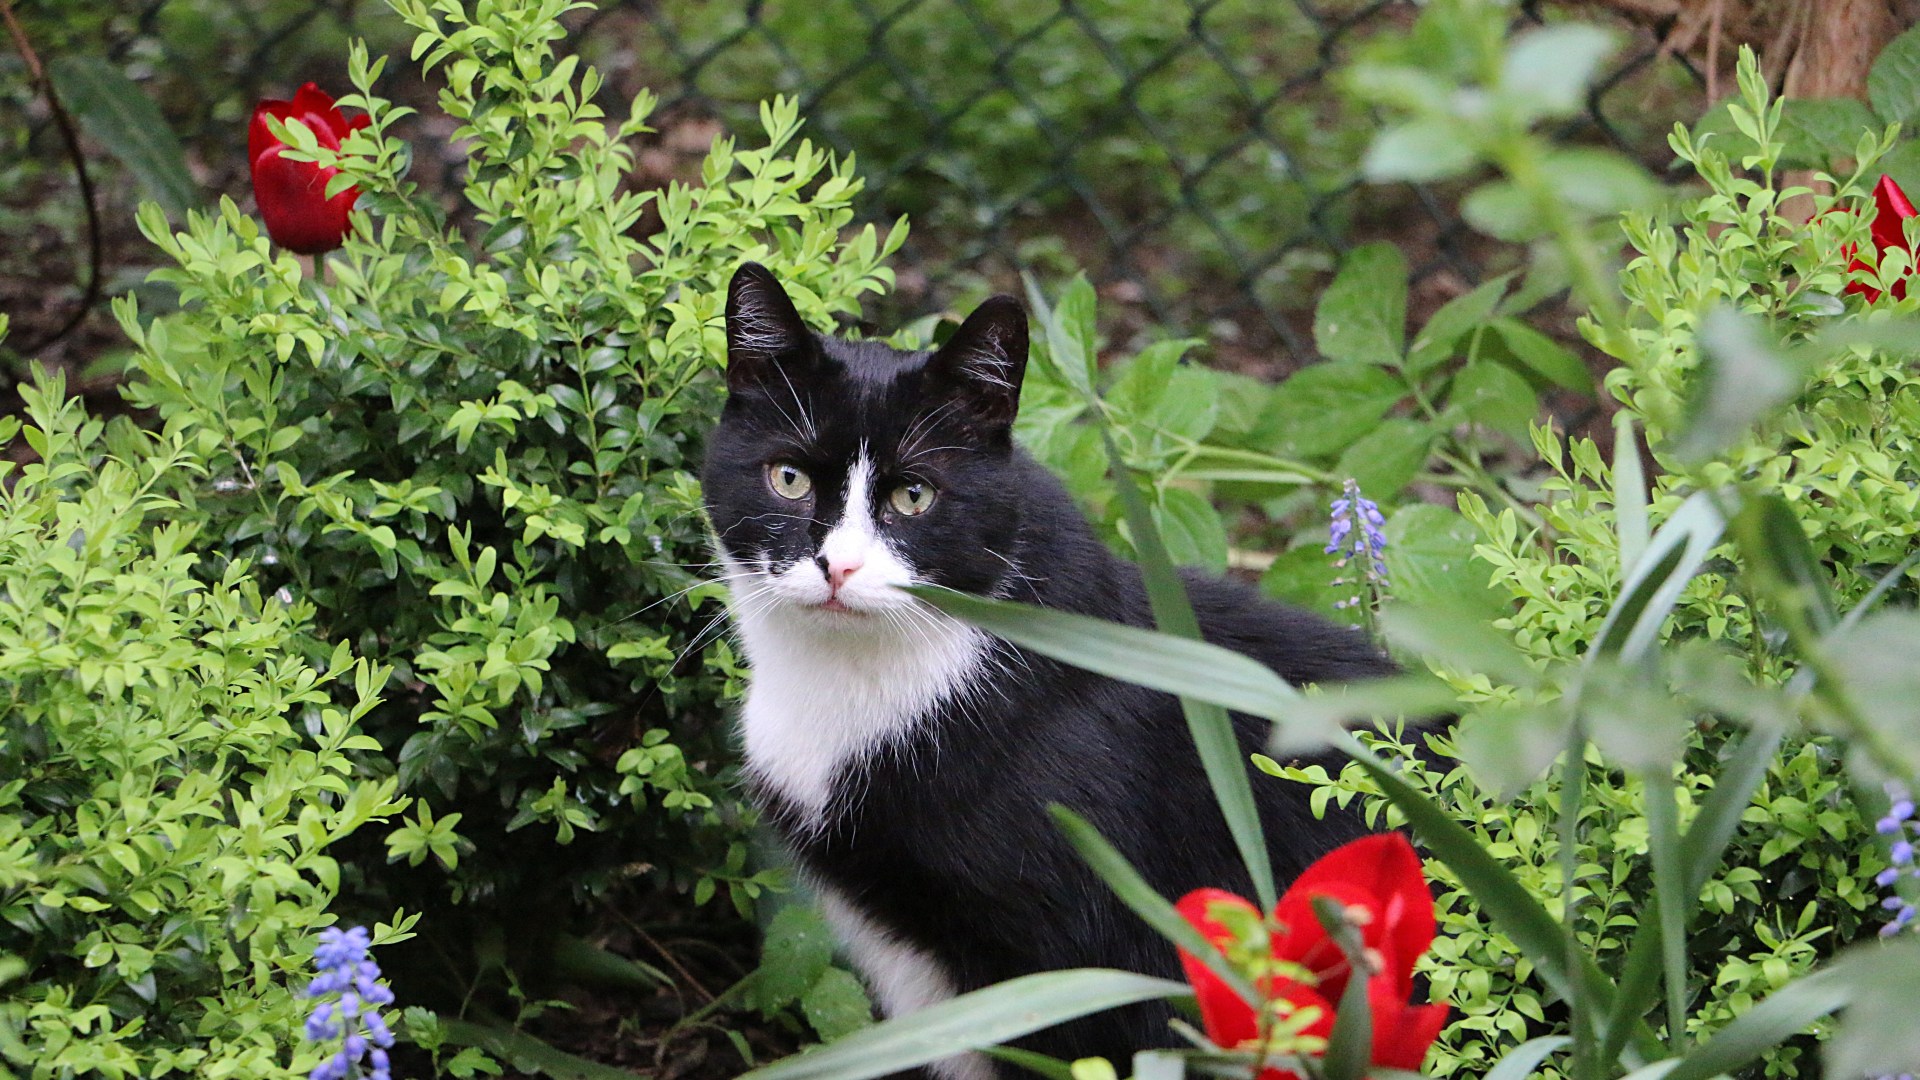 How to stop cats pooing in garden: 1.50 plant from B&Q that cats ‘hate’ [Video]